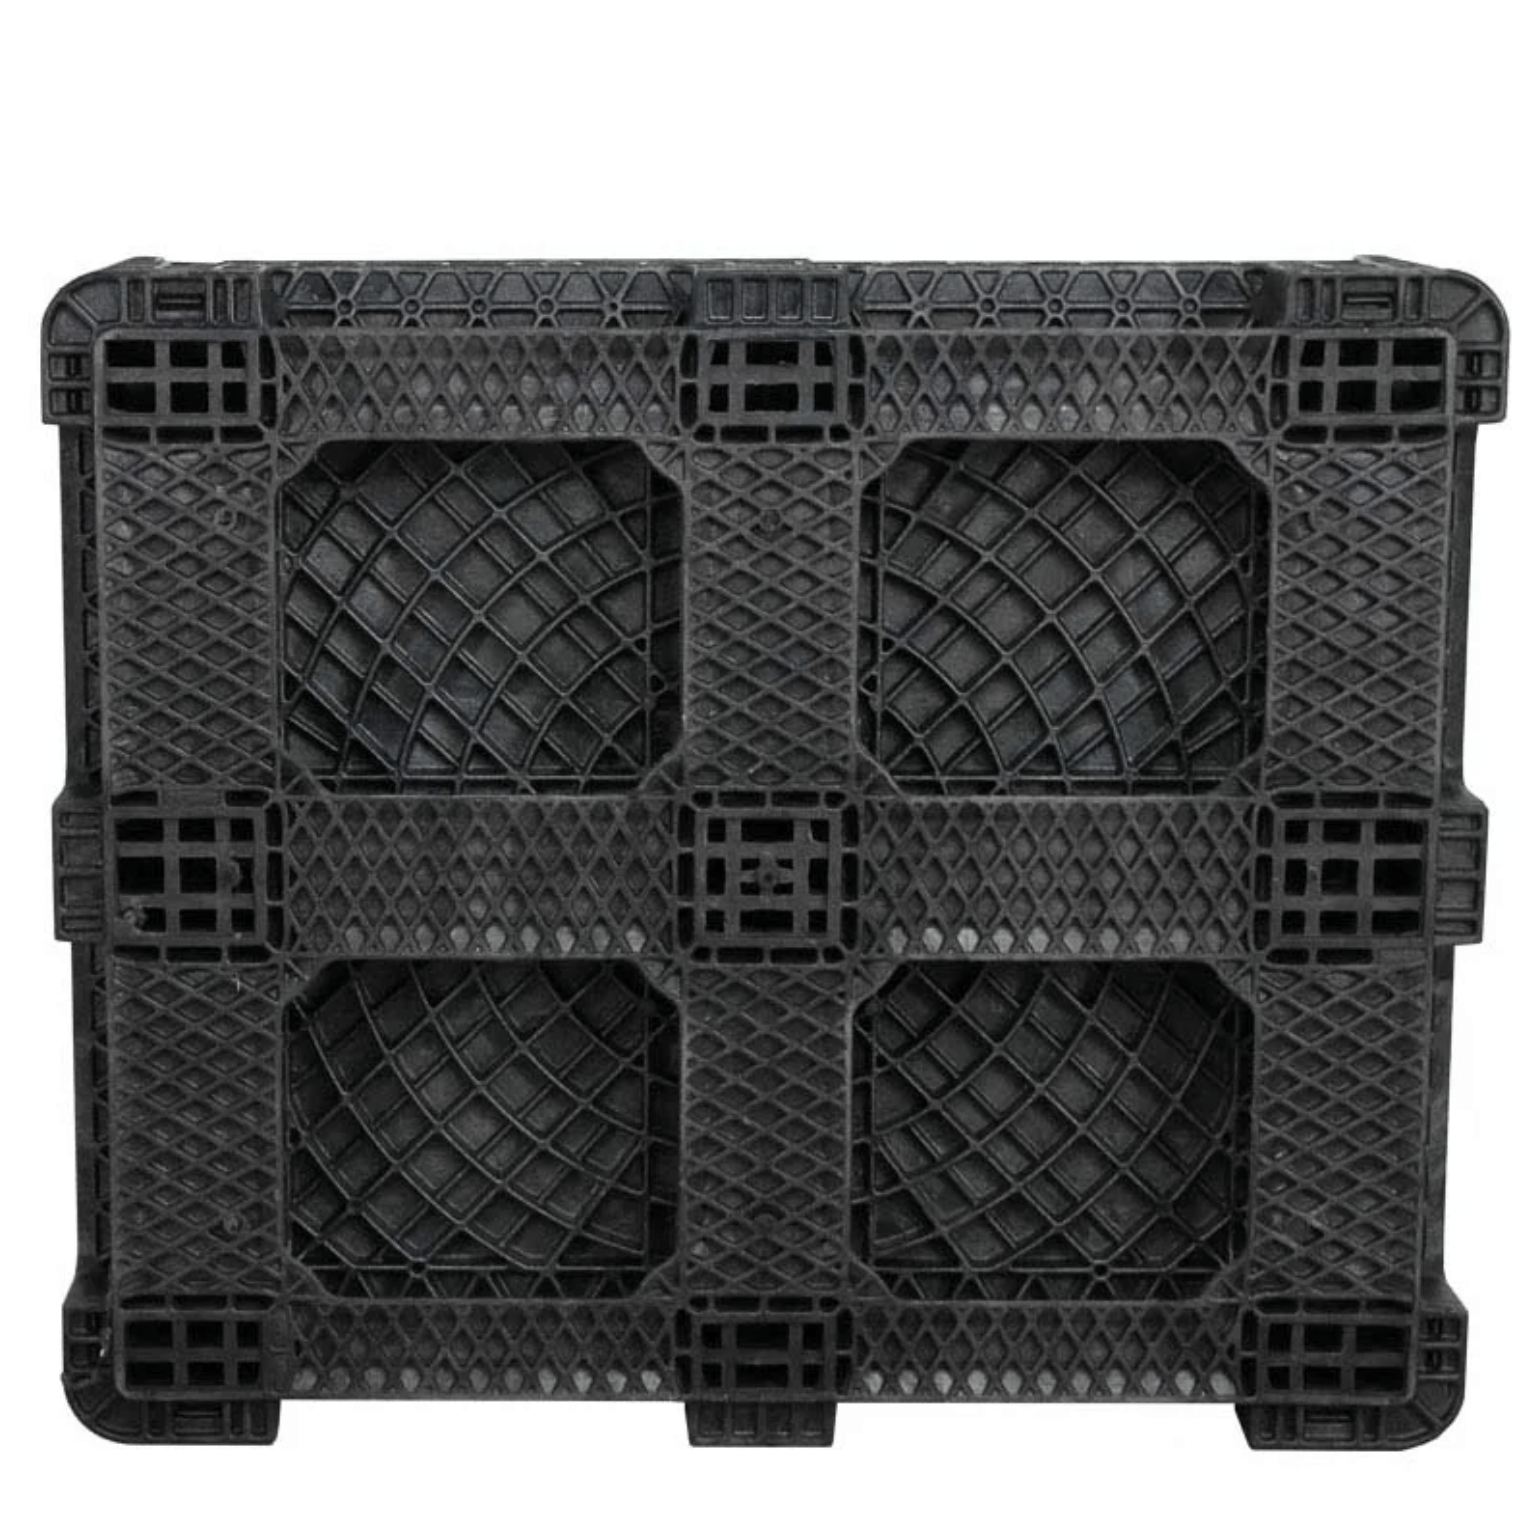 40 x 48 x 39 Collapsible Bulk Container bottom view